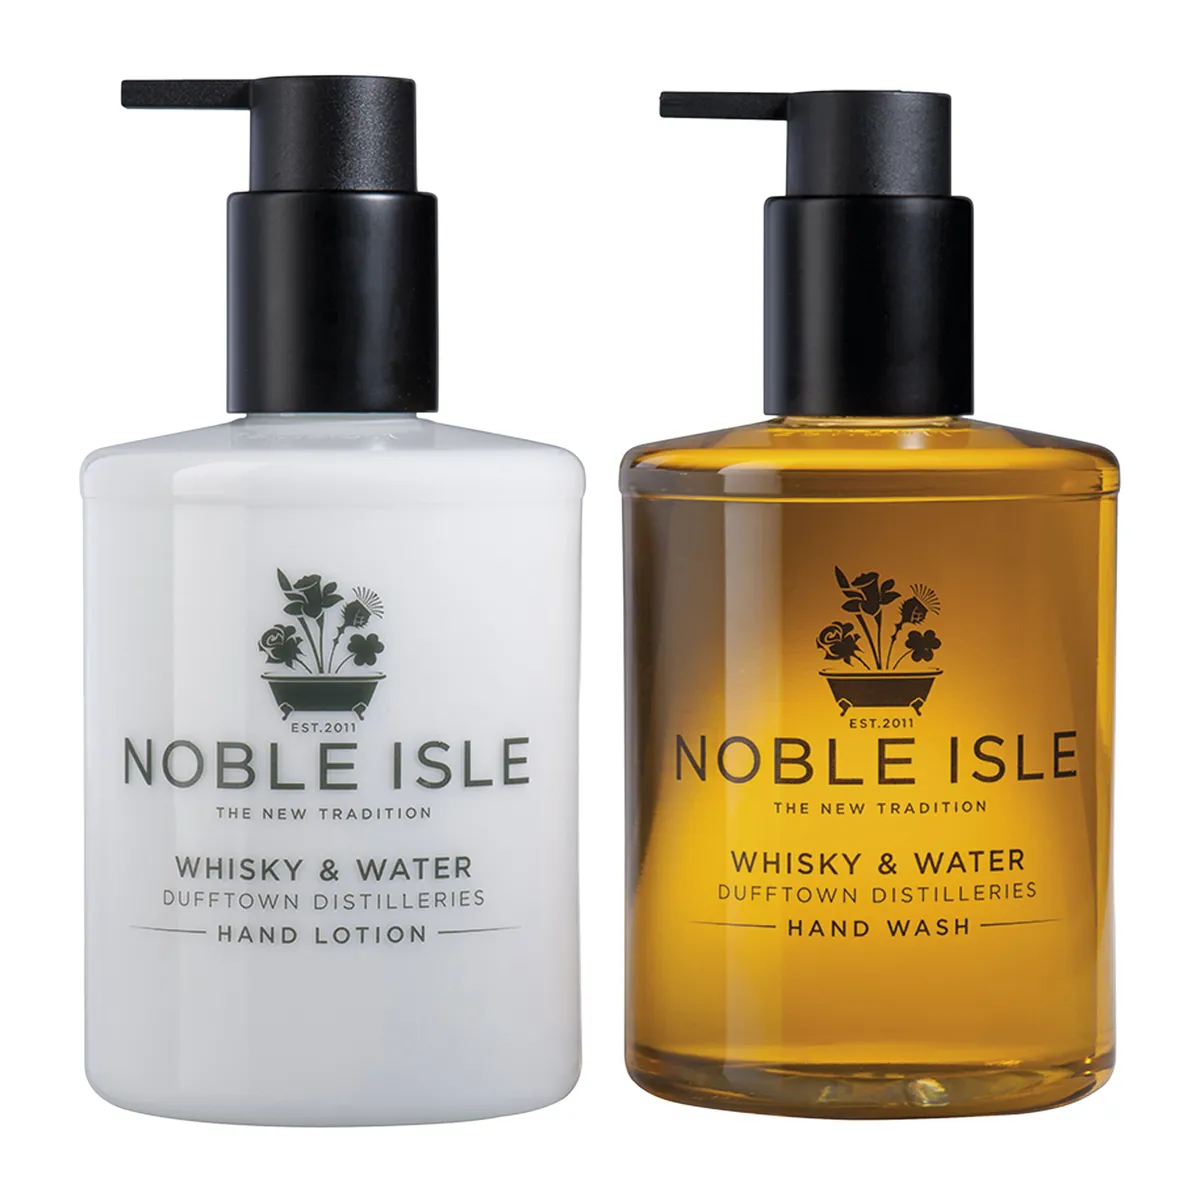 Noble Isle whiskey and water hand lotion, £21; Noble Isle whiskey and water hand wash, £19, both Amara